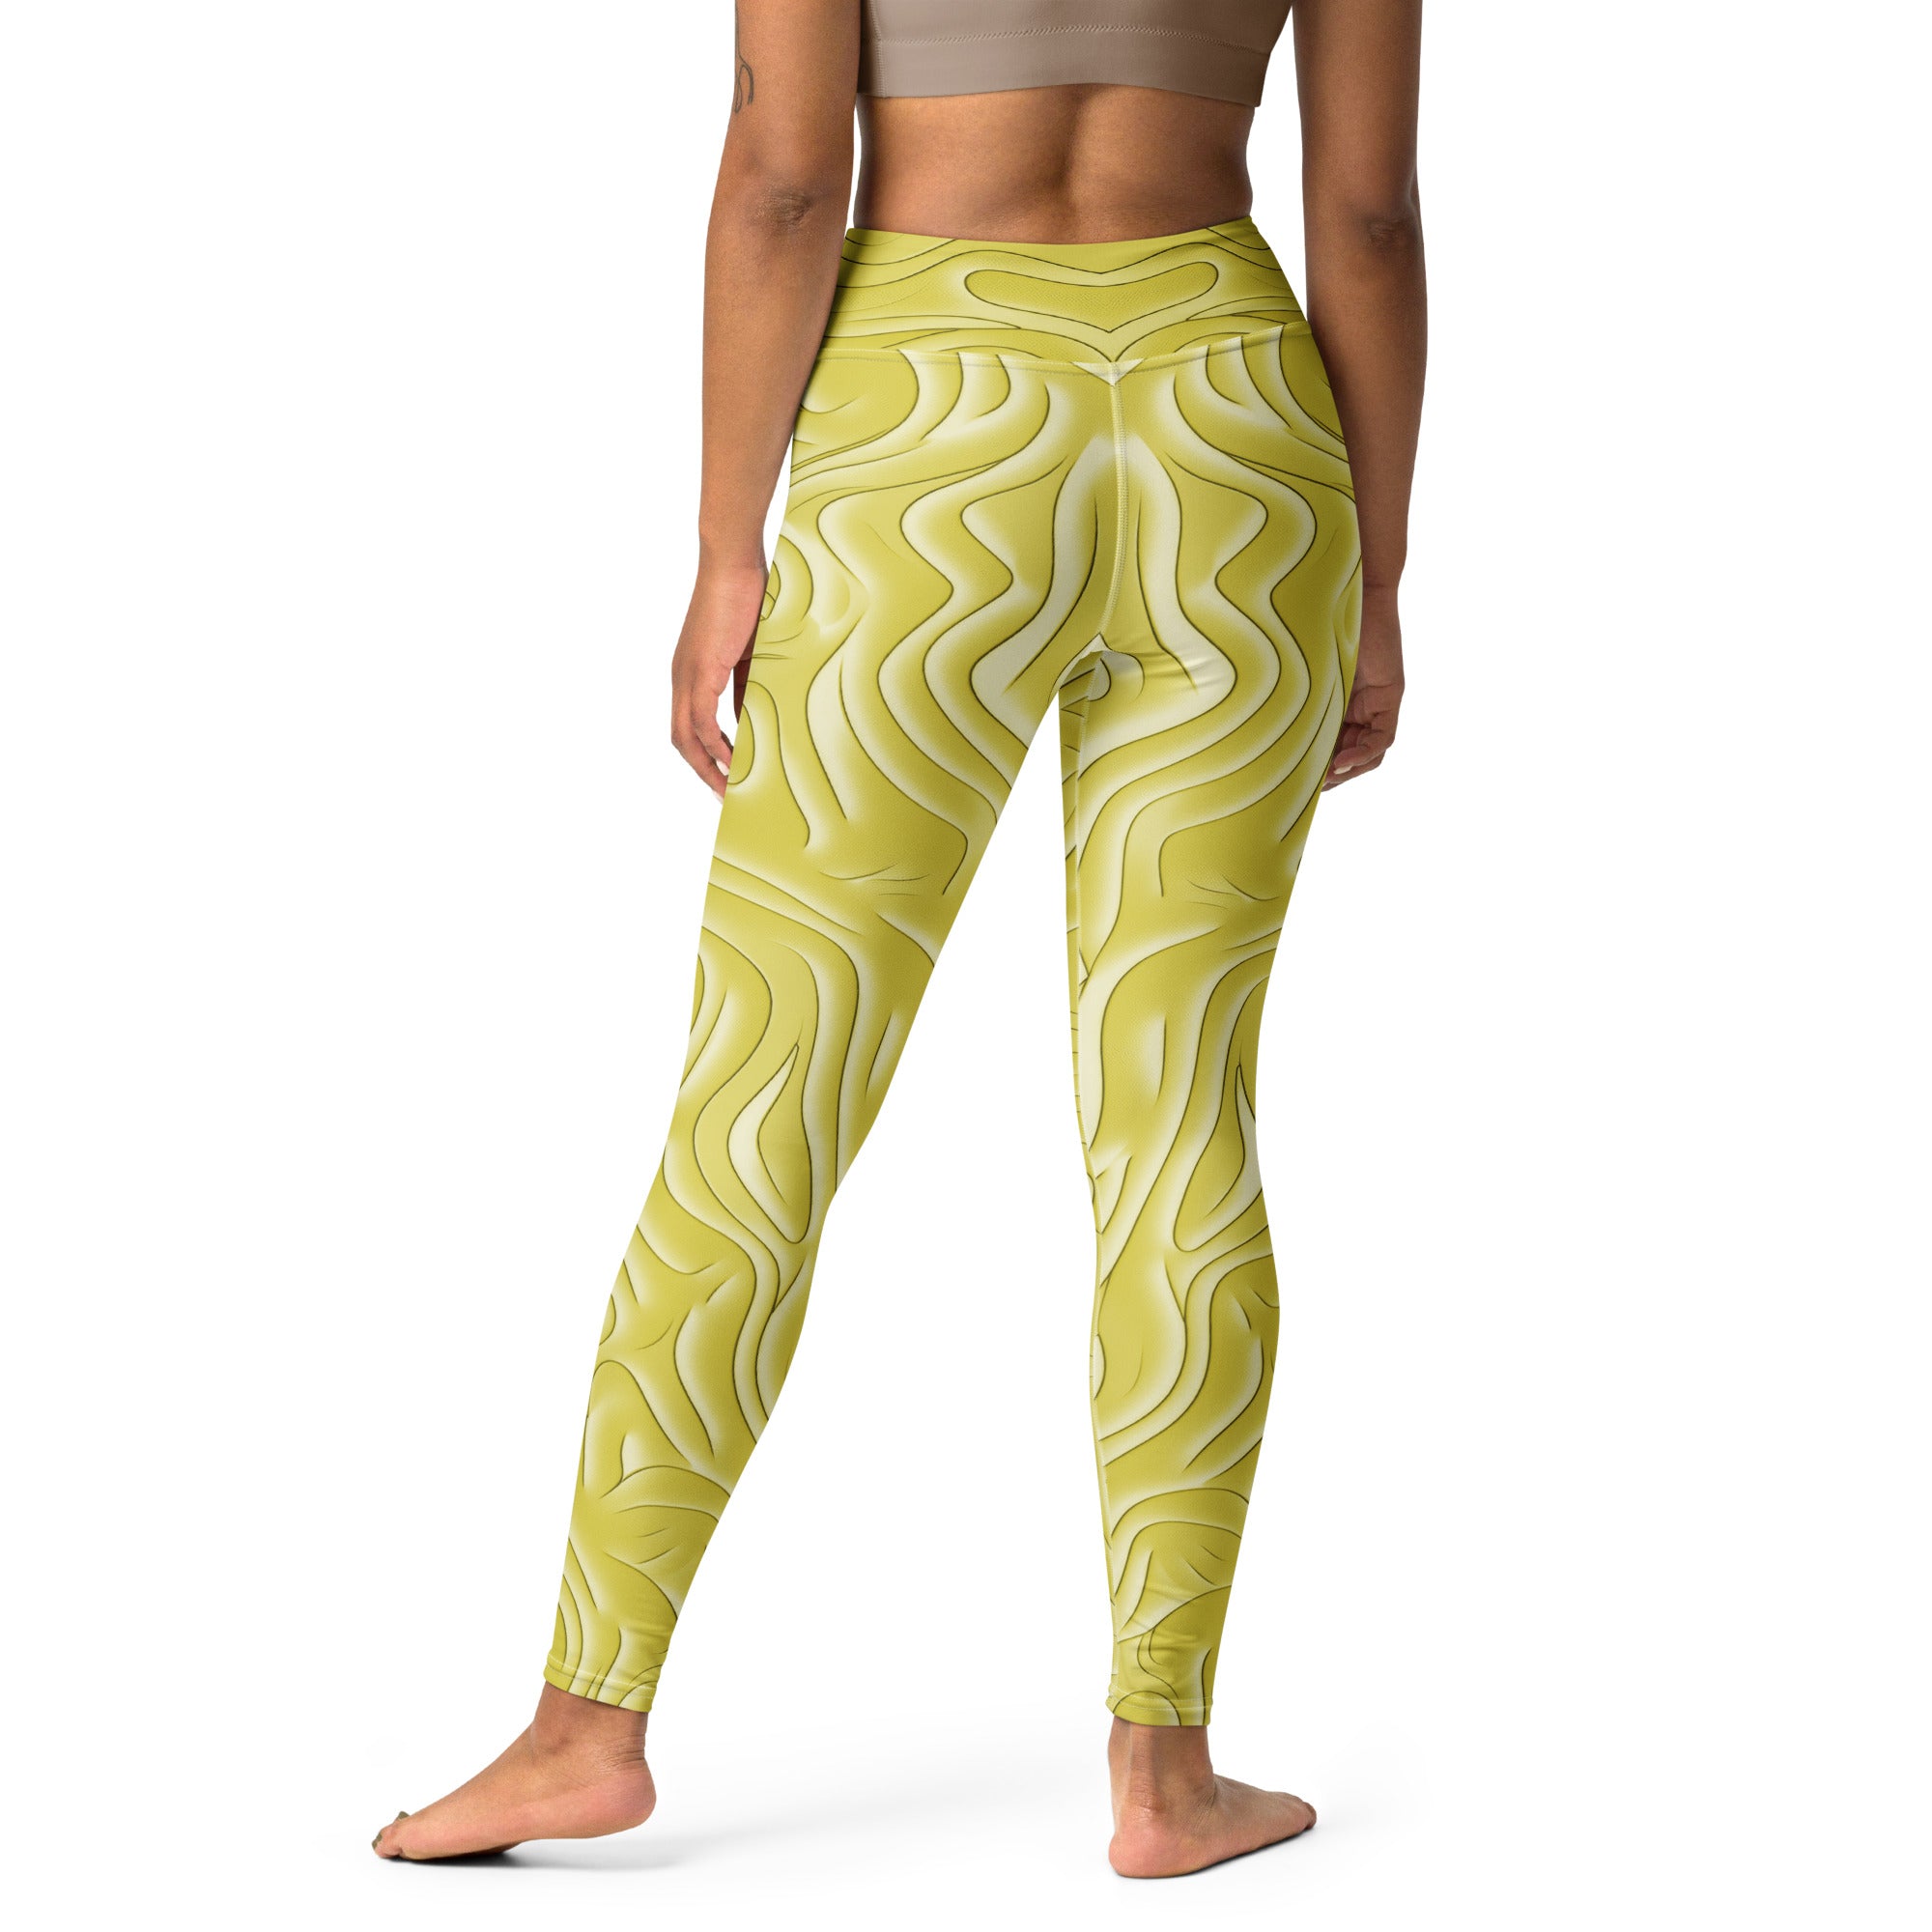 Close-up of Psychedelic Swirl Yoga Leggings' intricate design.